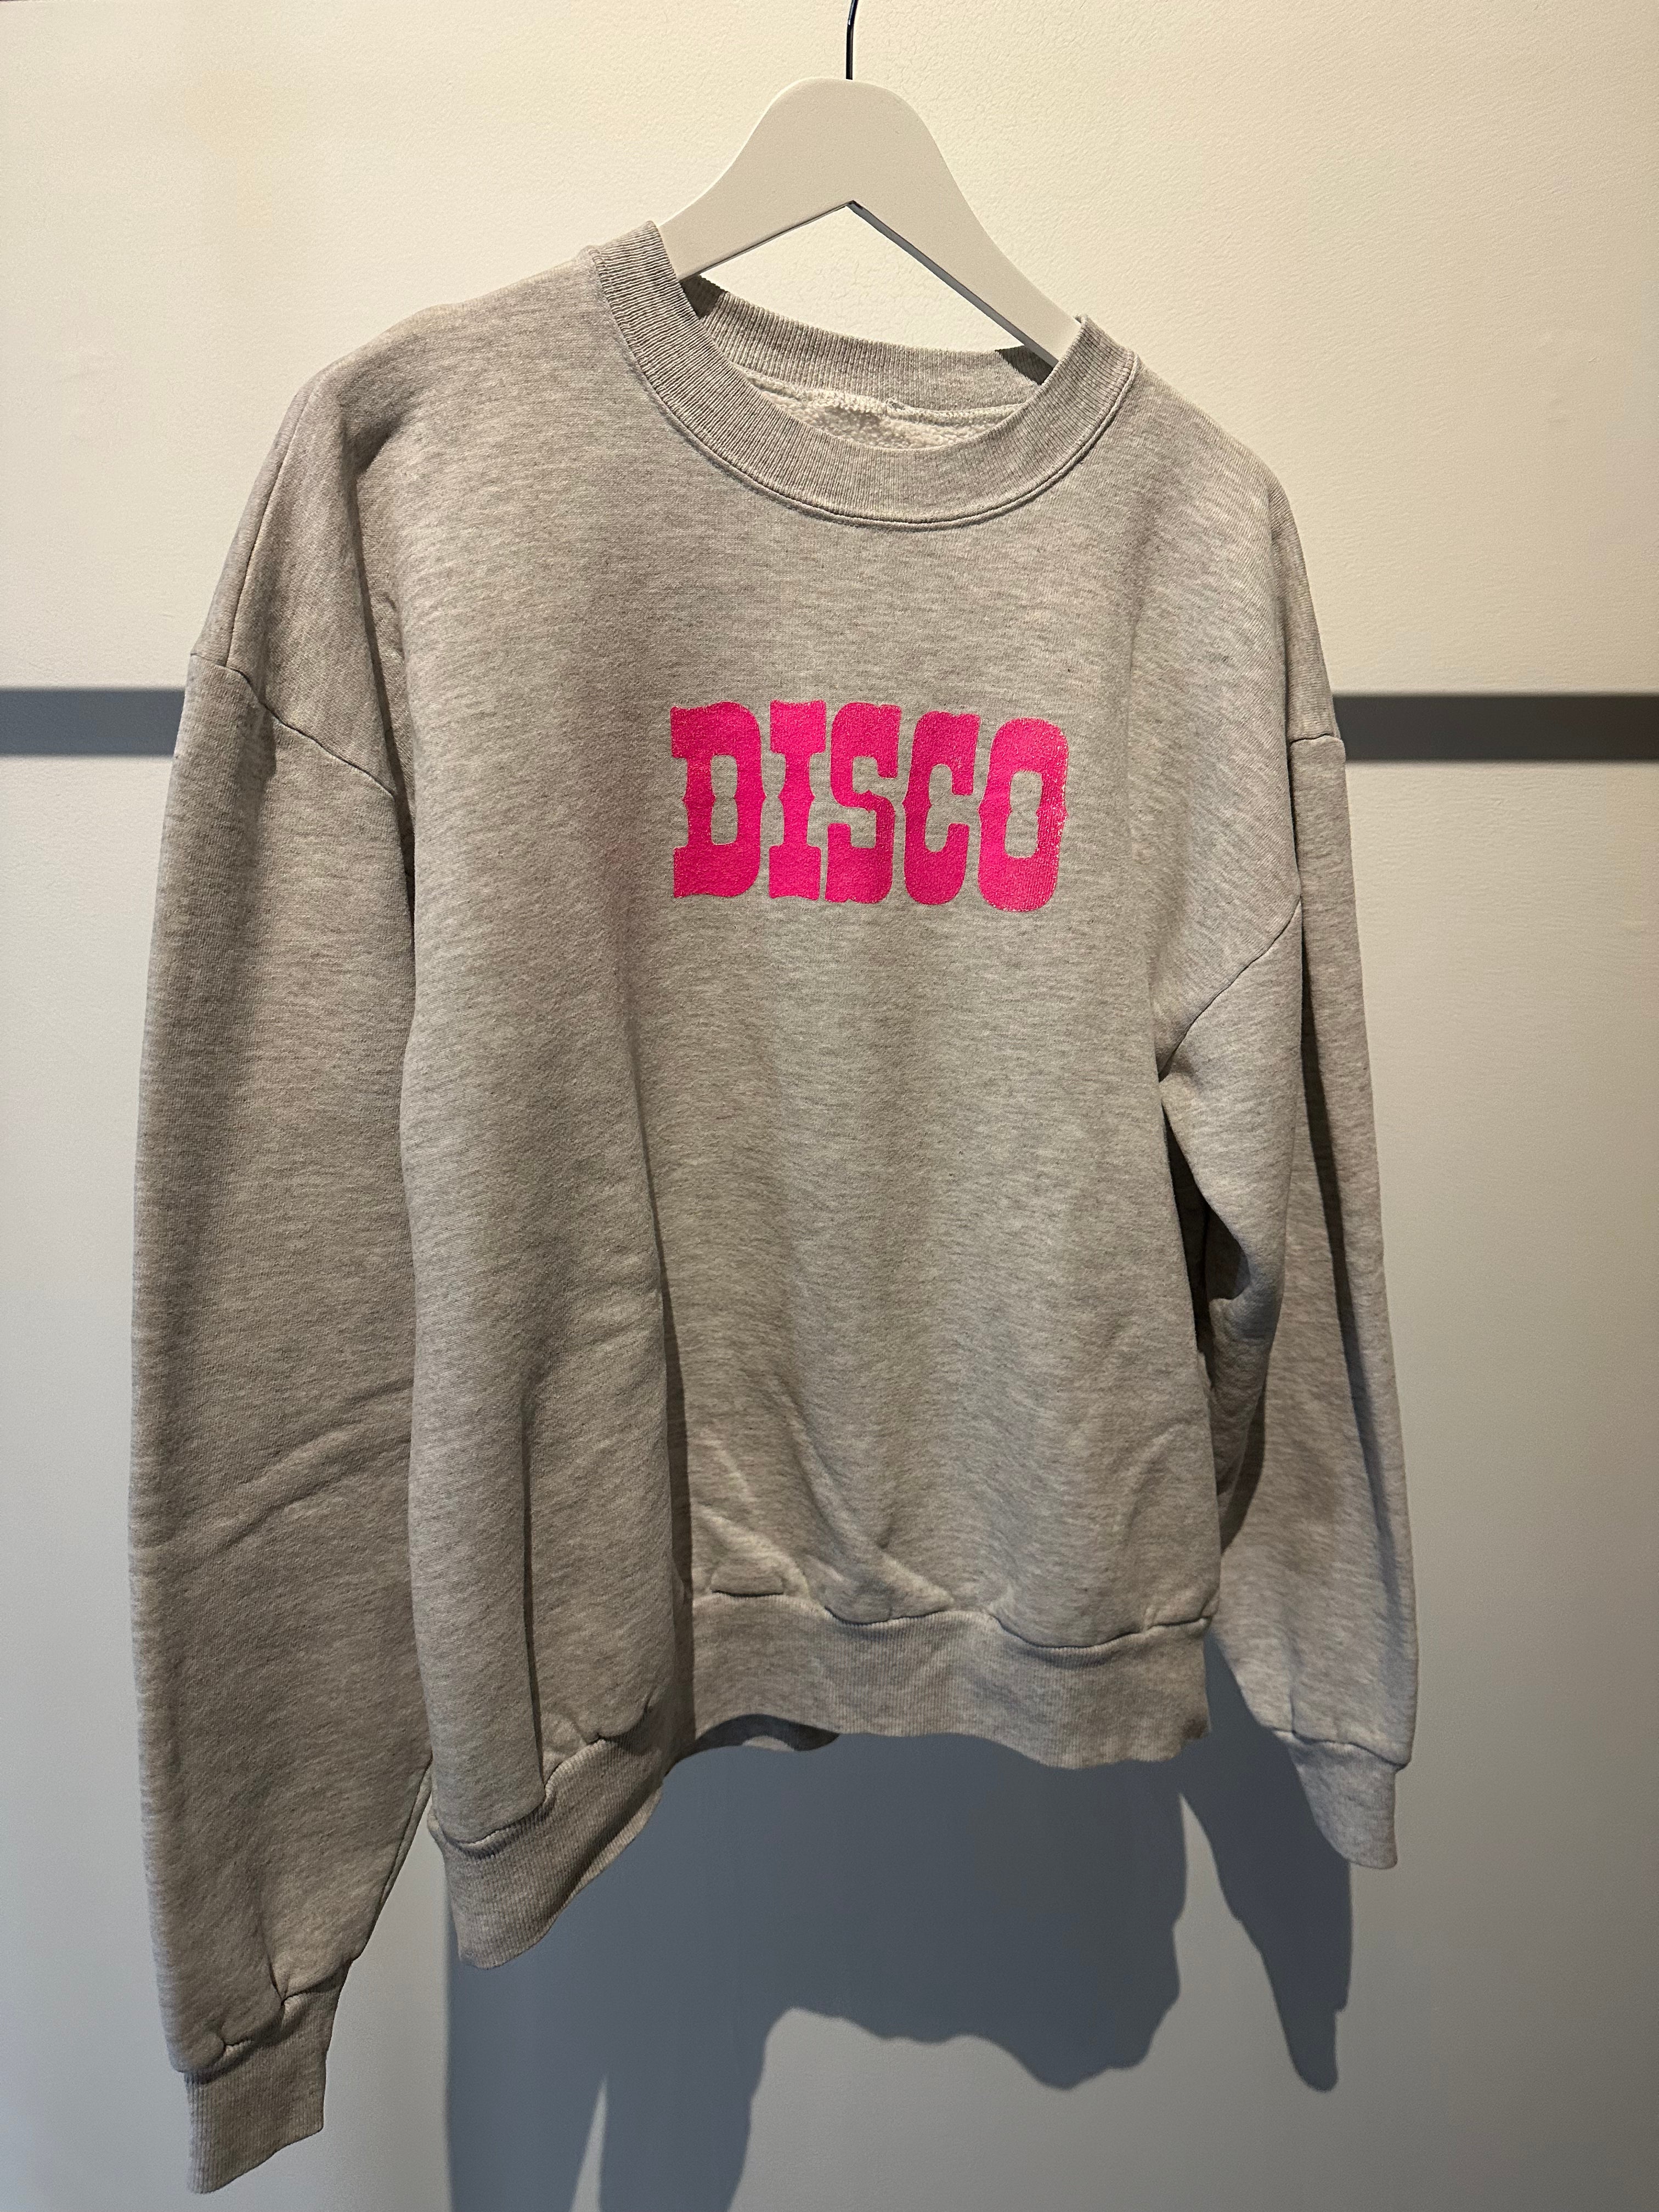 Vintage Westbound Pullover- distressed pink on grey